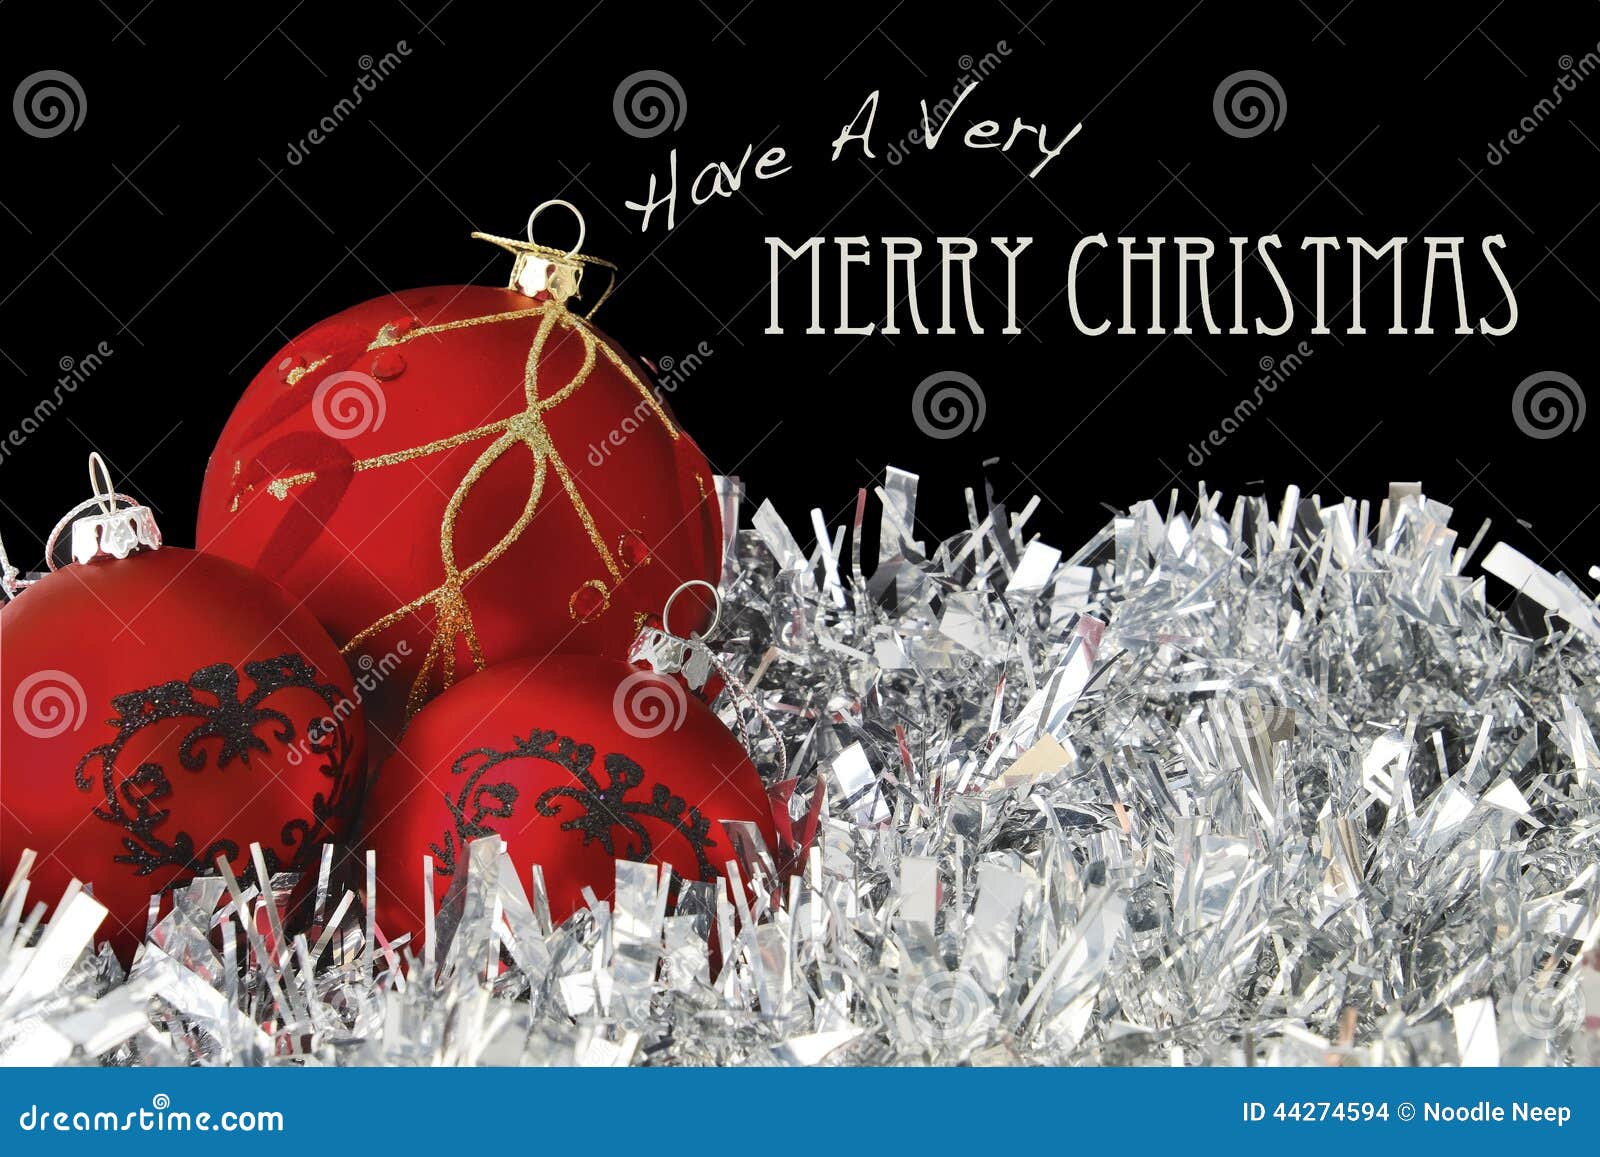 Merry Christmas With Red Baubles On Tinsel Stock Photo 